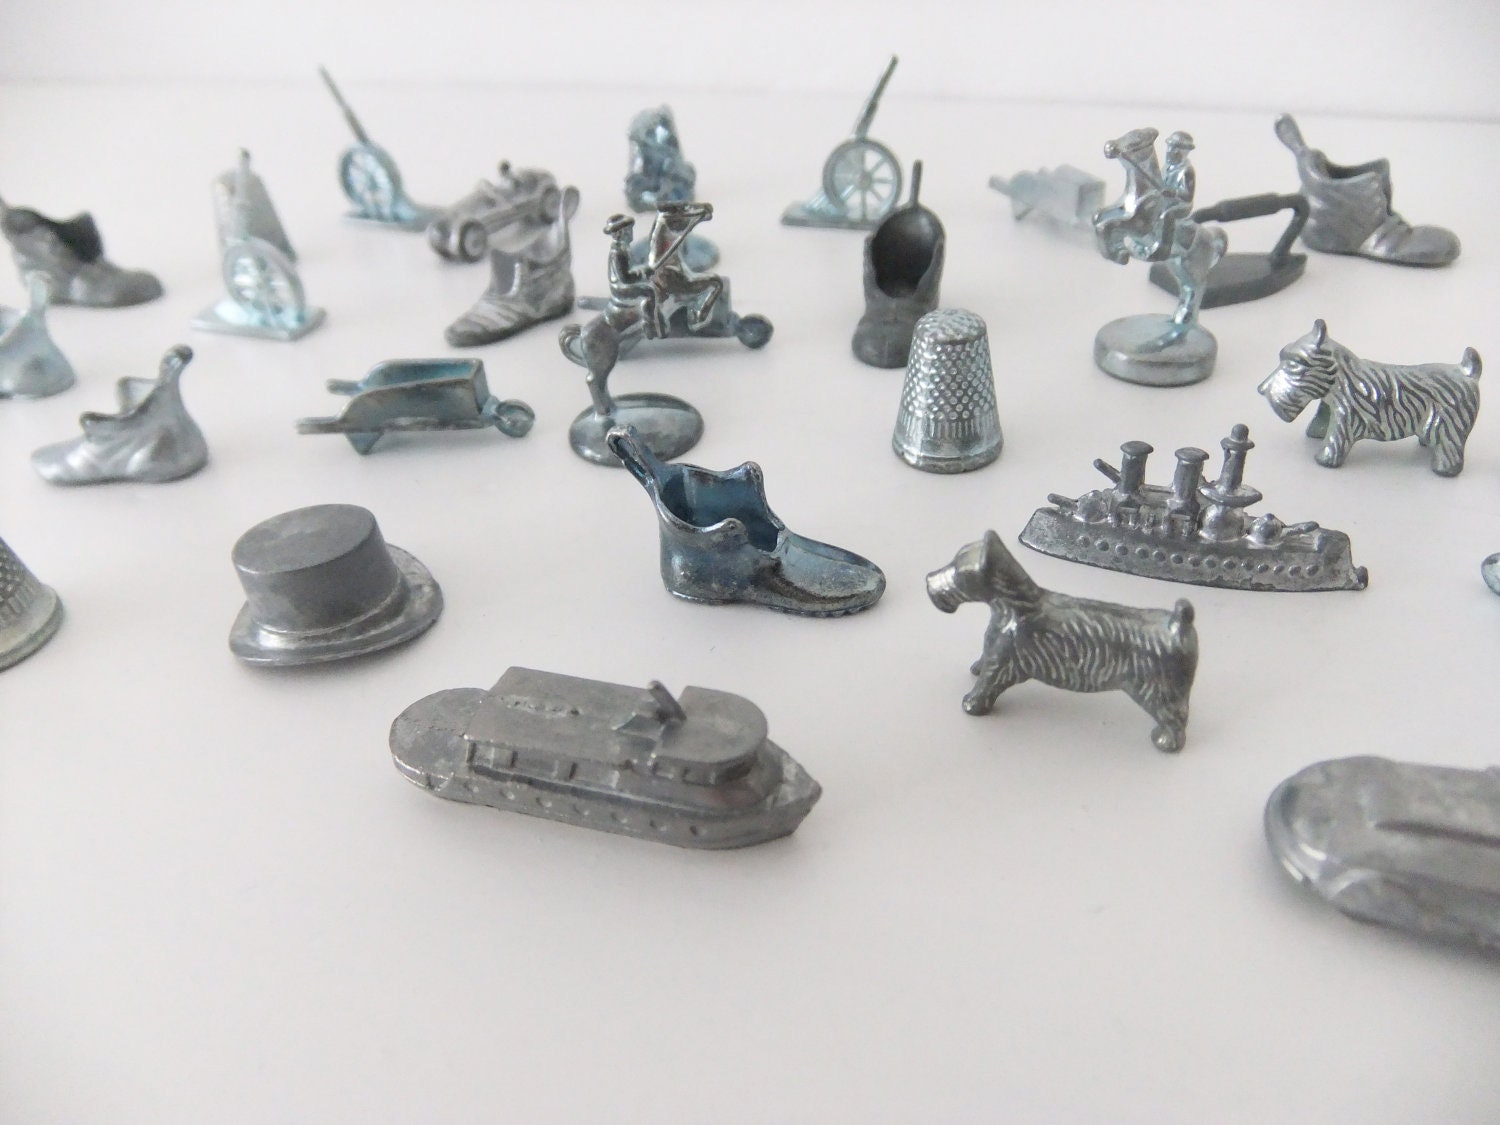 30 Monopoly game pieces mixed metal pieces from old Monopoly